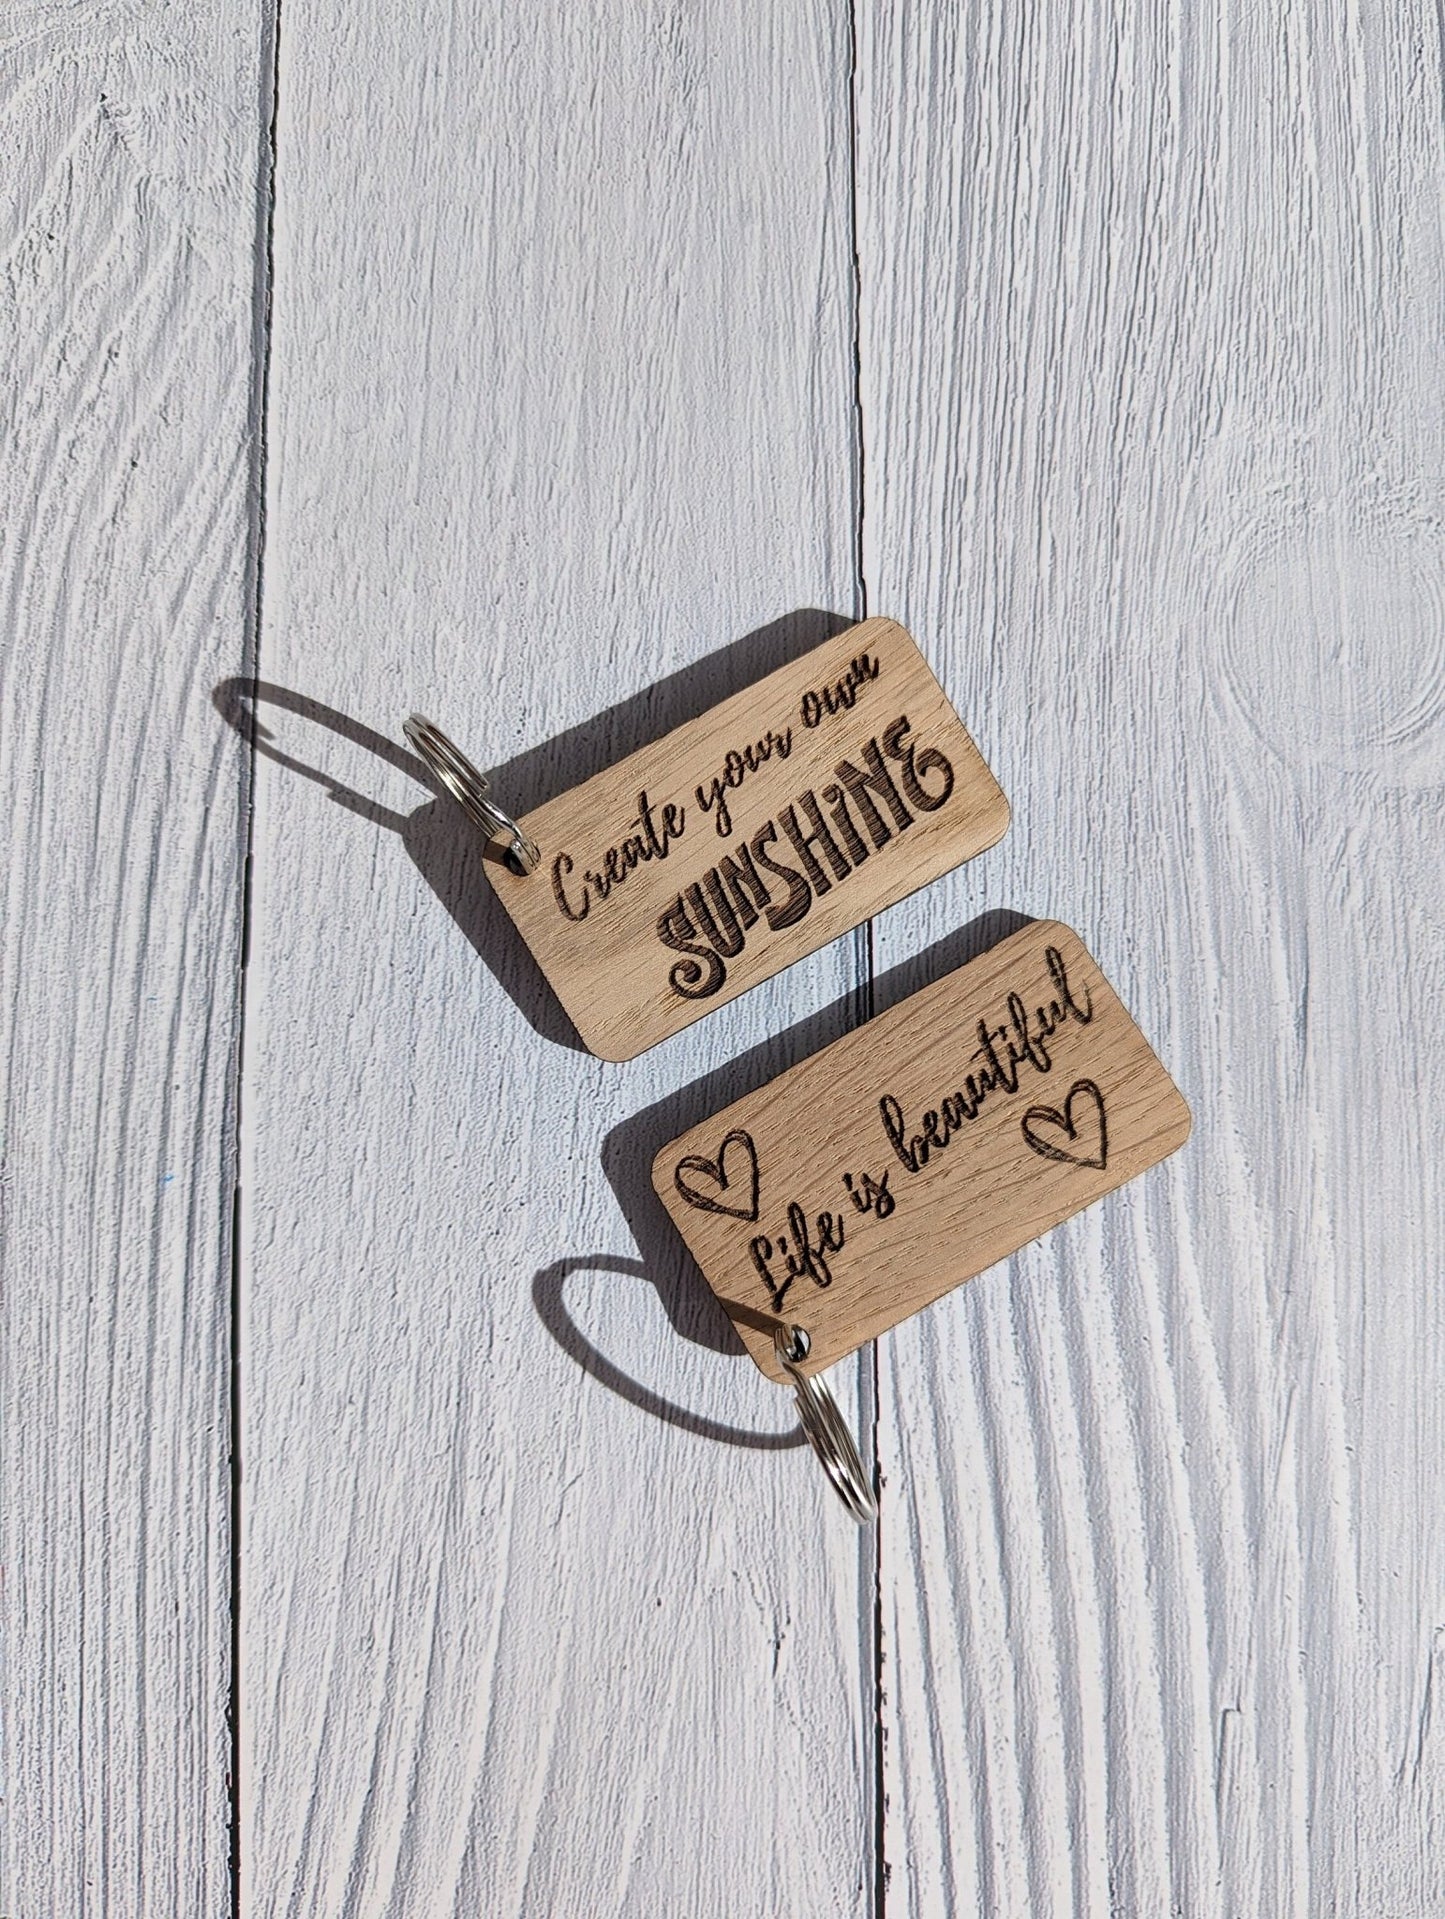 Uplifting Keyrings - "Create Your Own Sunshine" or "Life is Beautiful" - CherryGroveCraft